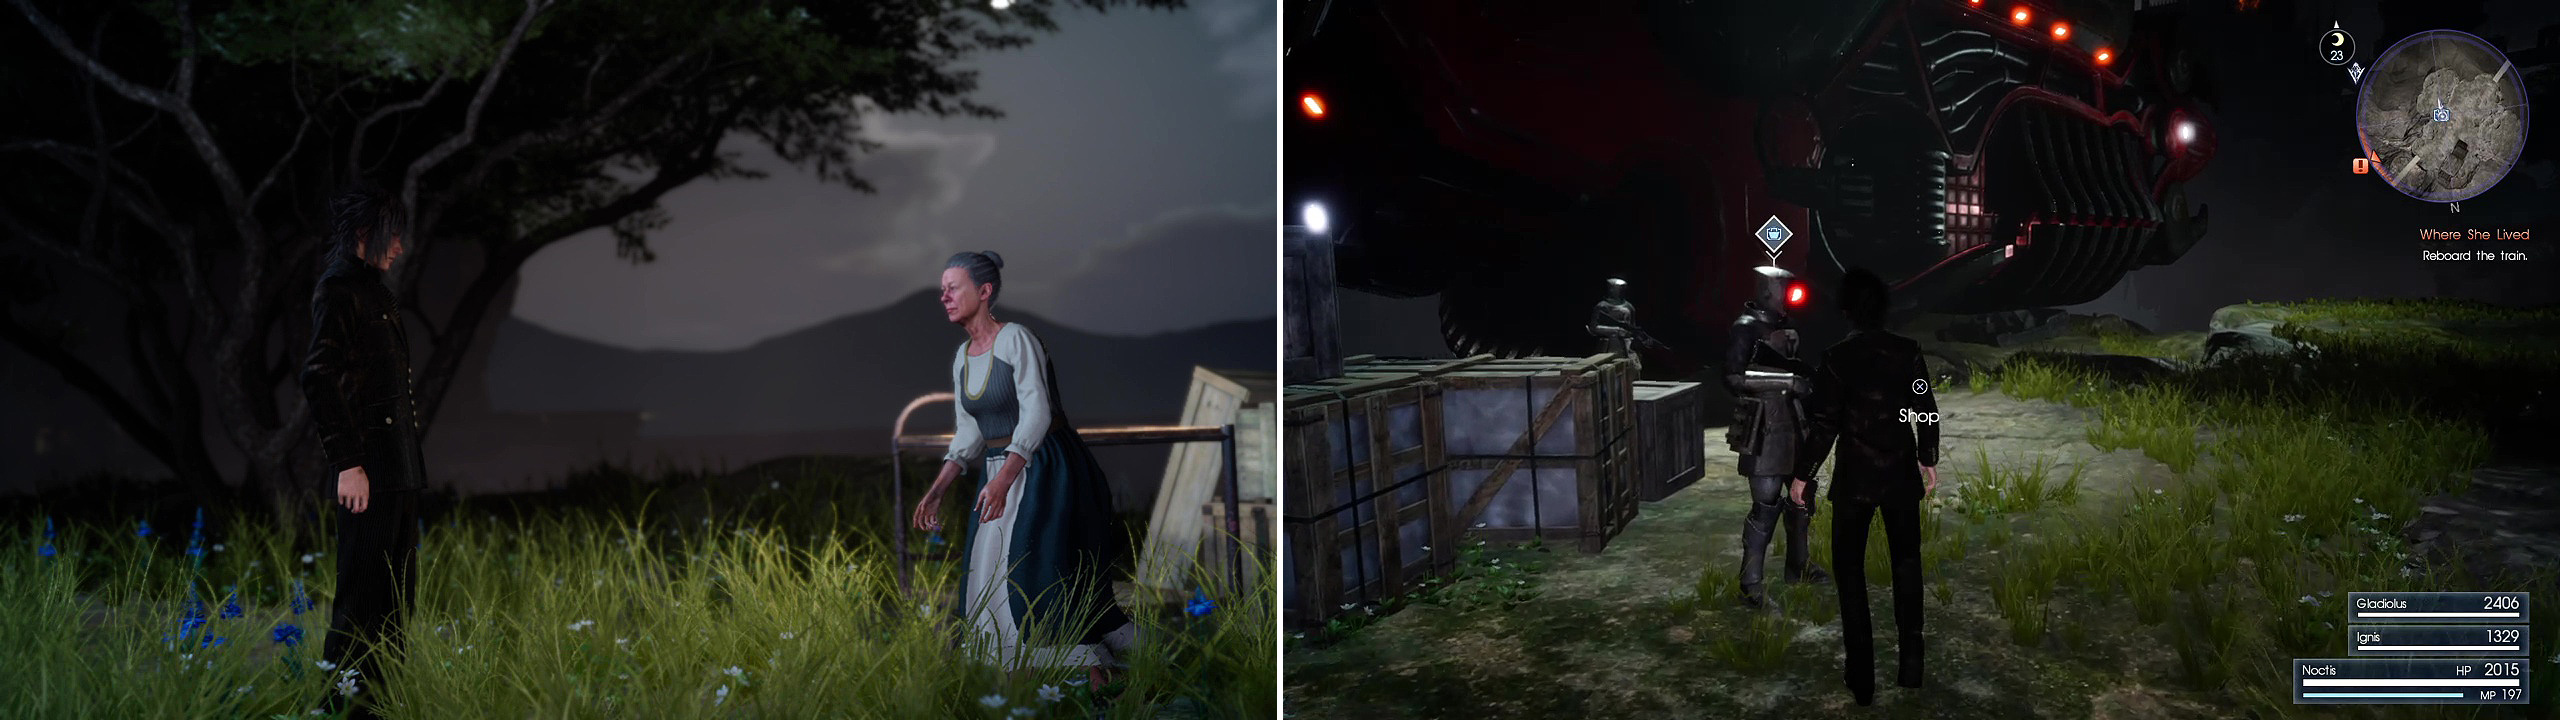 Speak to the House Fleuret retainer (left) to learn more about Luna and then don't forget to shop for healing items before setting out (right).